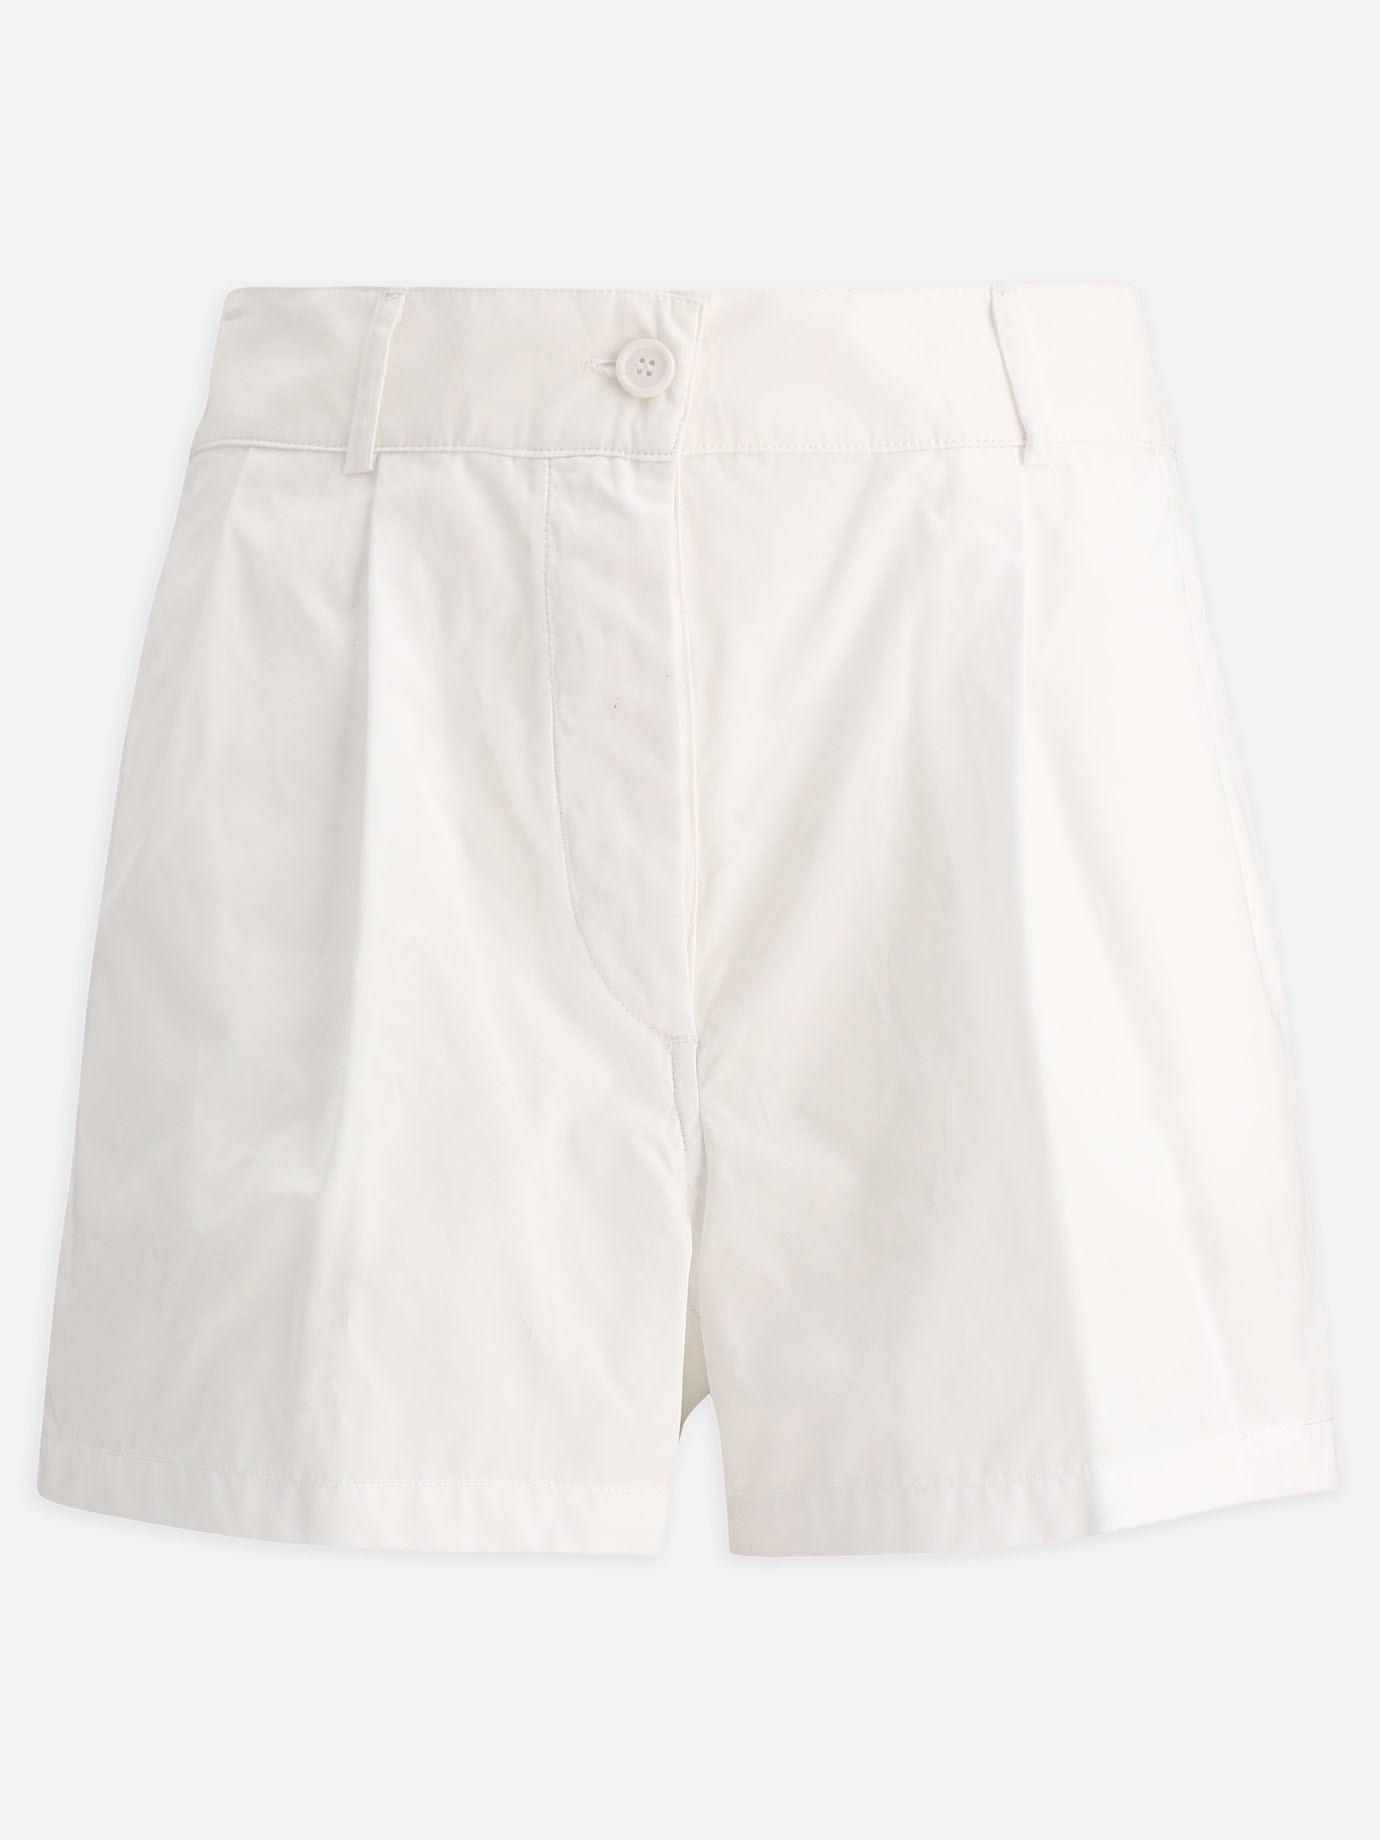 Tailored shorts